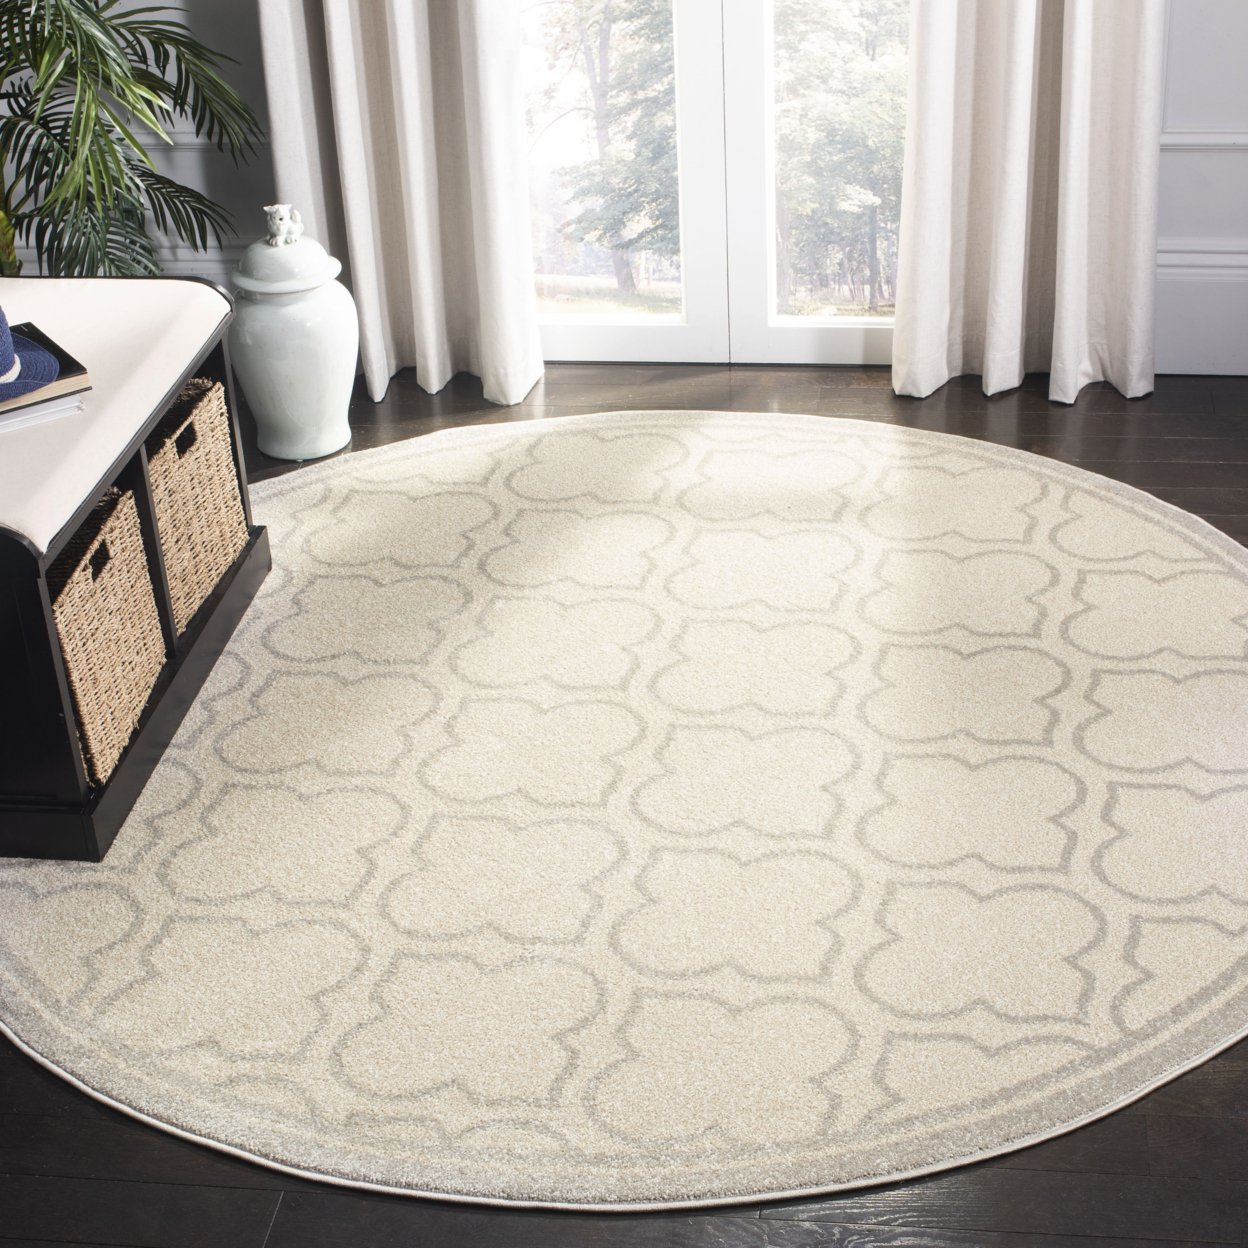 SAFAVIEH Amherst Collection AMT412E Ivory/Light Grey Rug - 7' Square